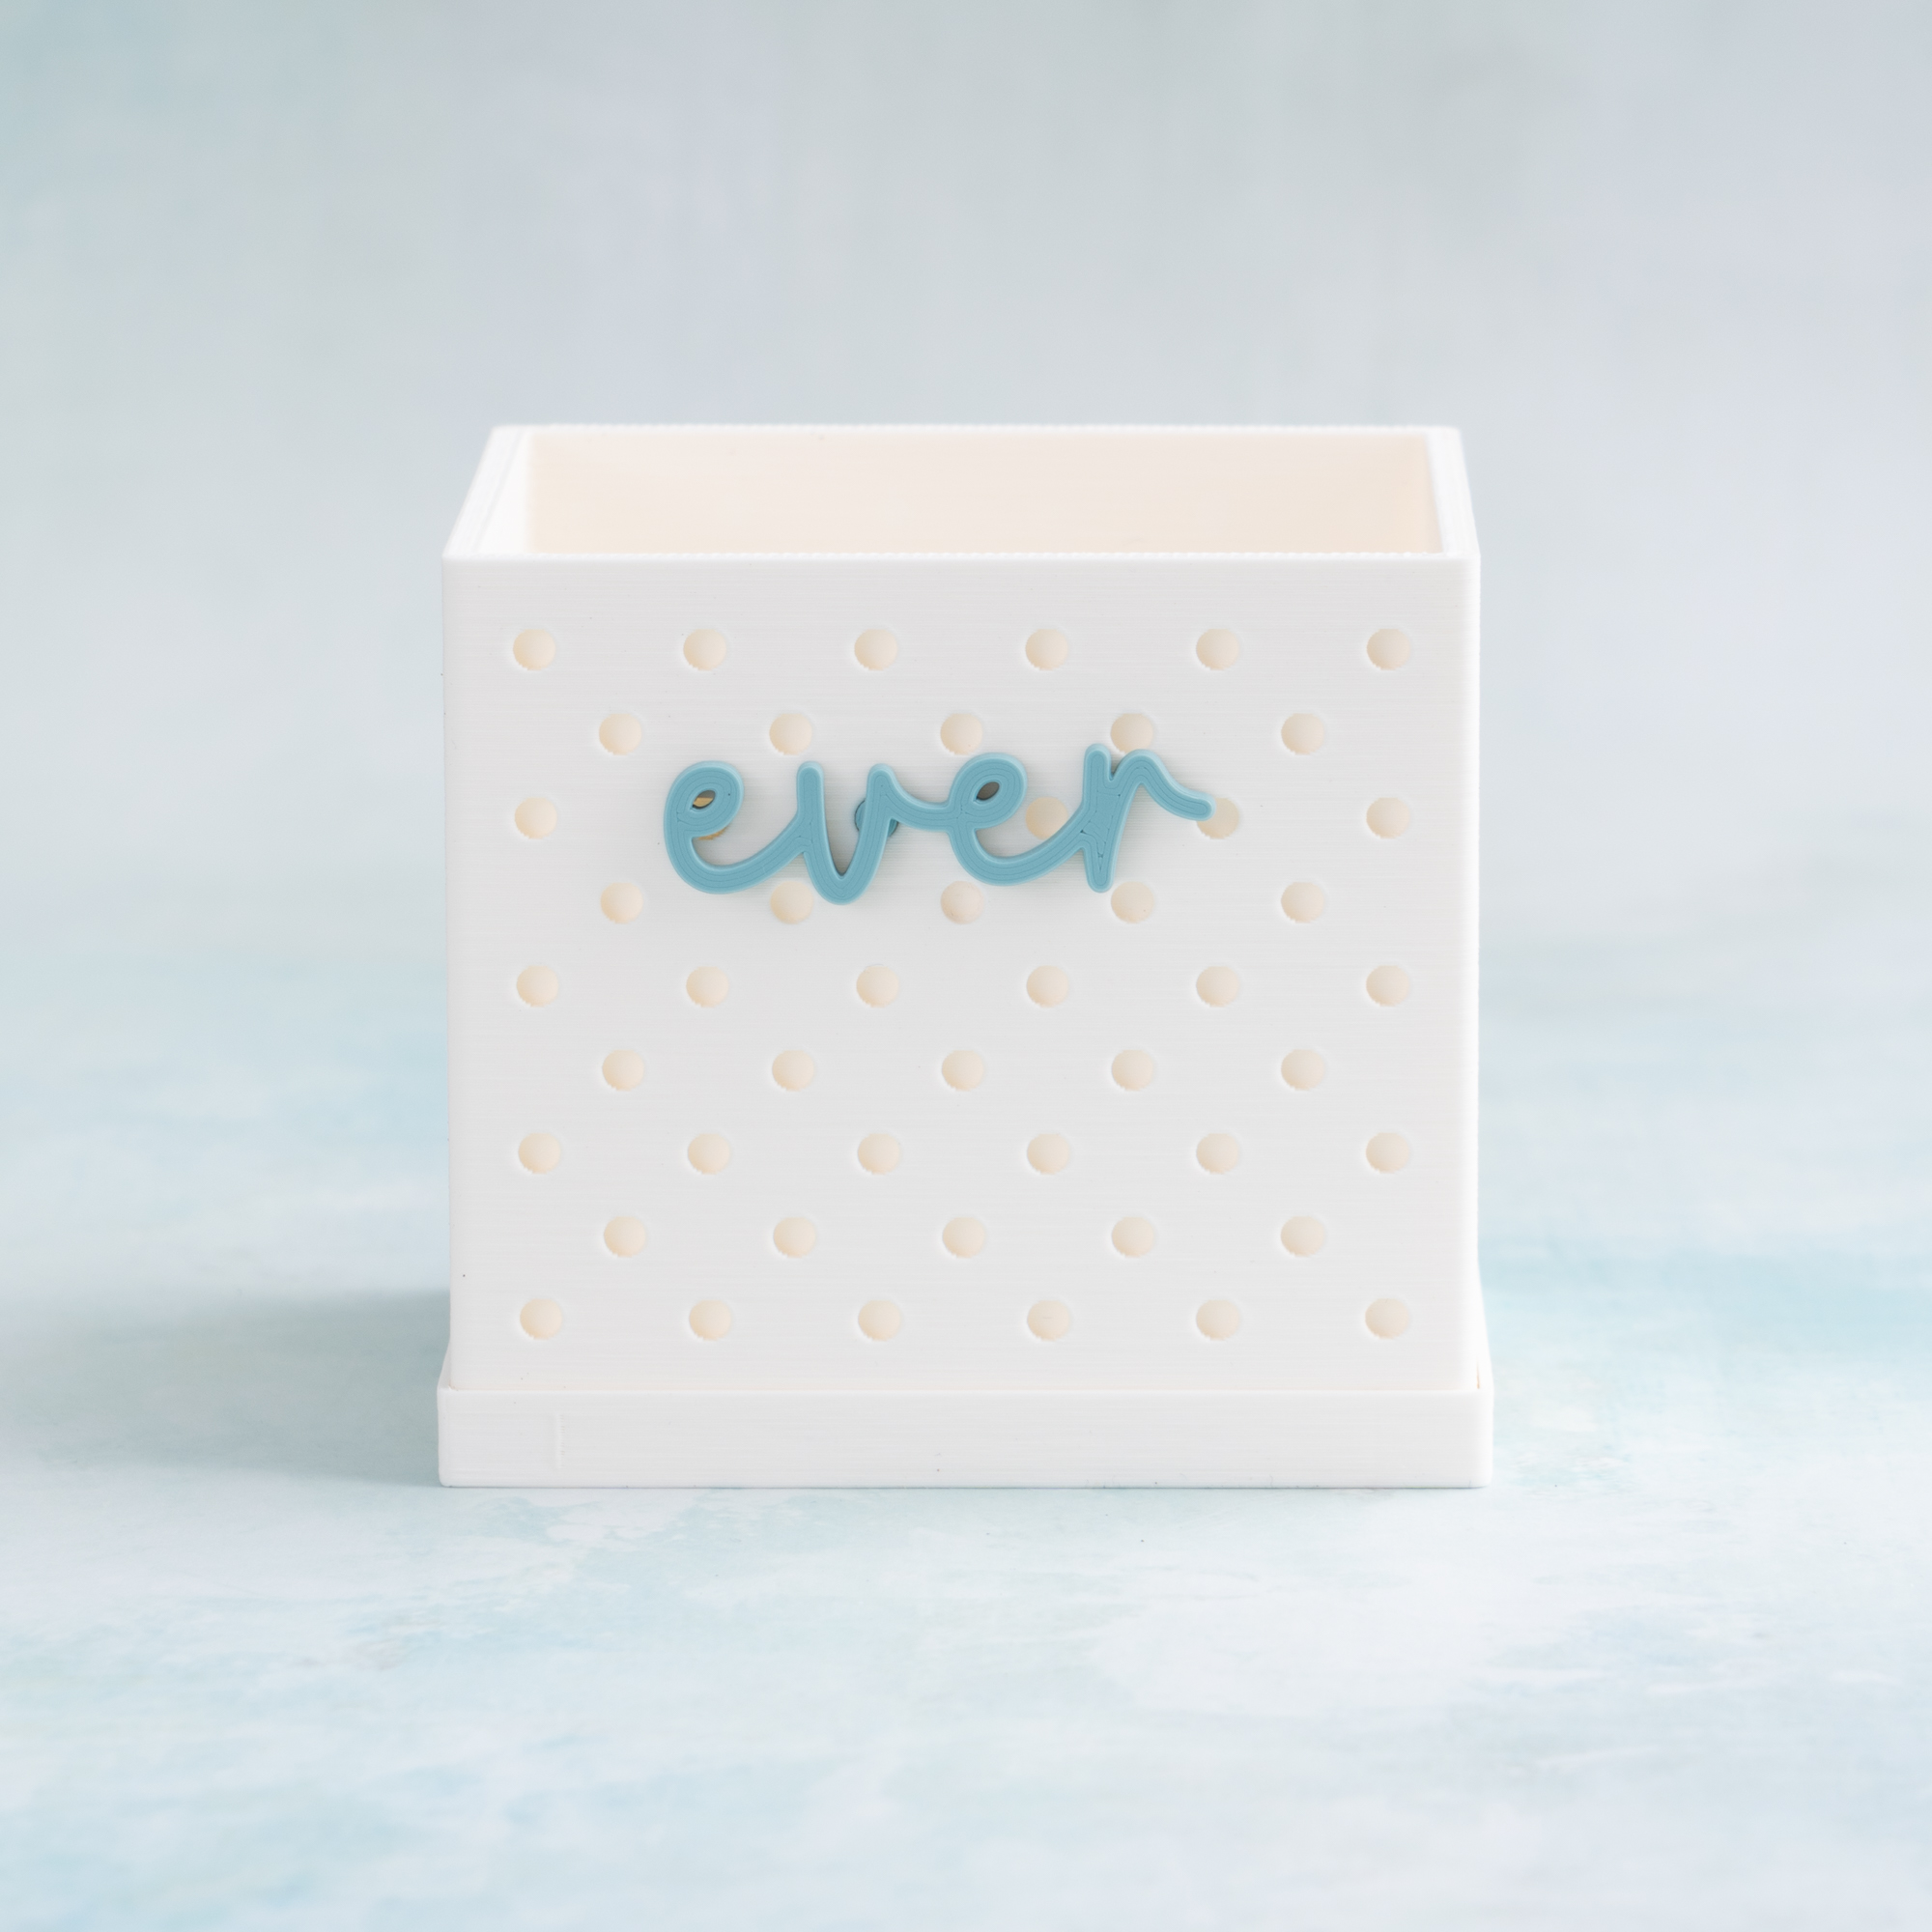 ever turquoise word snap on pot